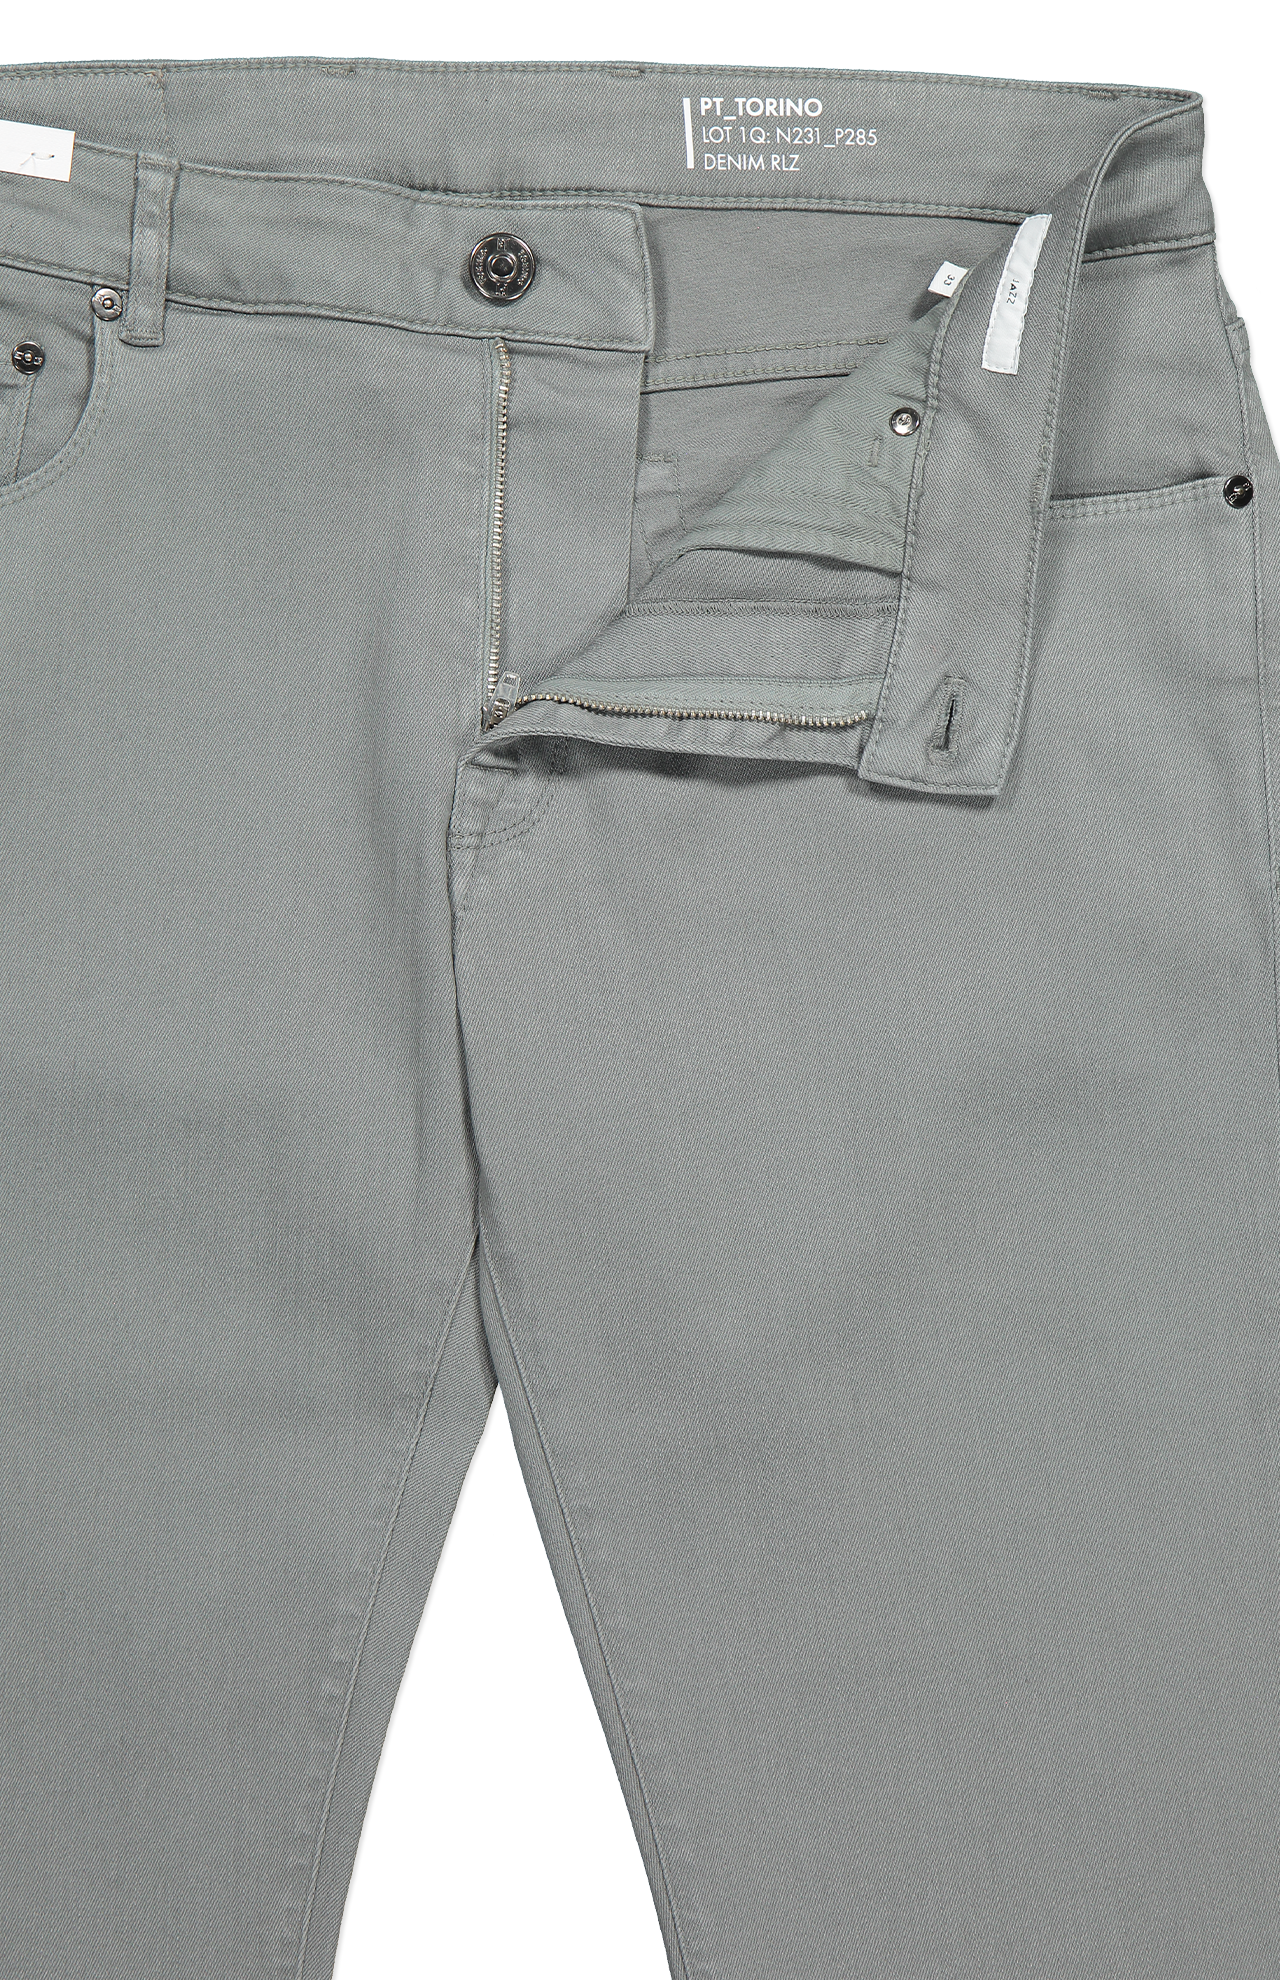 PT Torino Authentic Soft Touch Colored Denim Light Grey Front Detail Image (7026280005747)